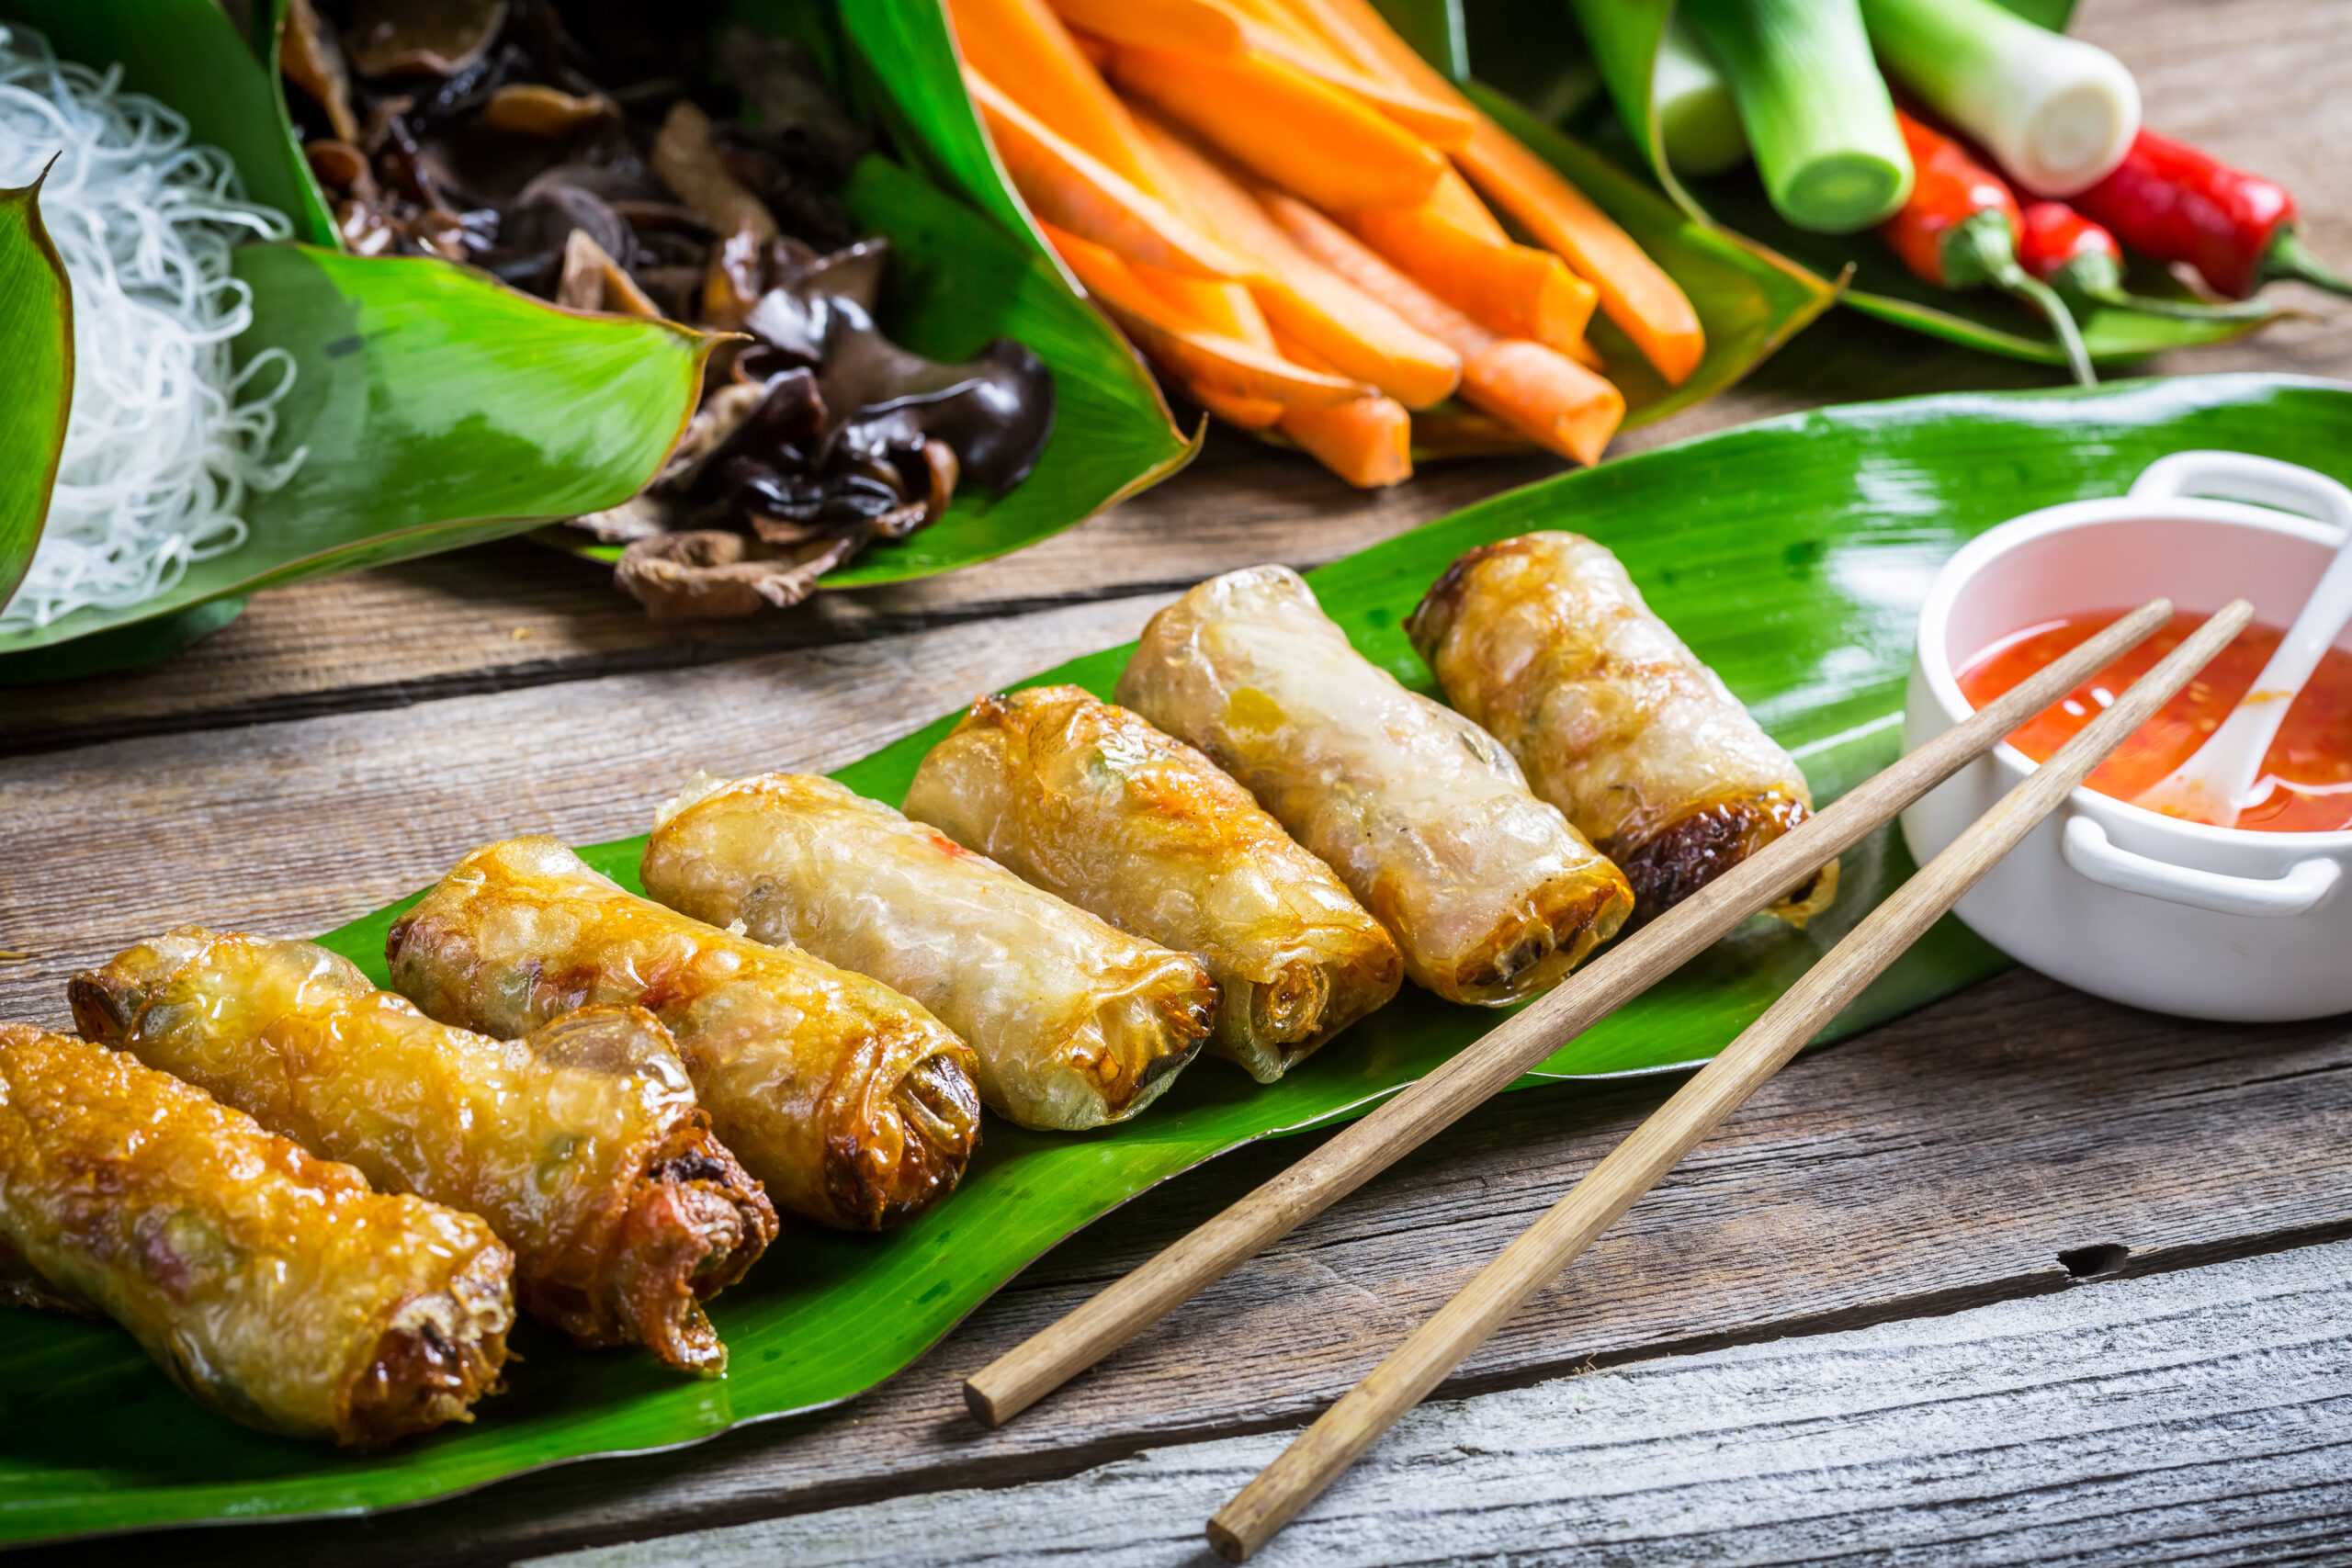 Make Vietnamese Spring Rolls with rice paper